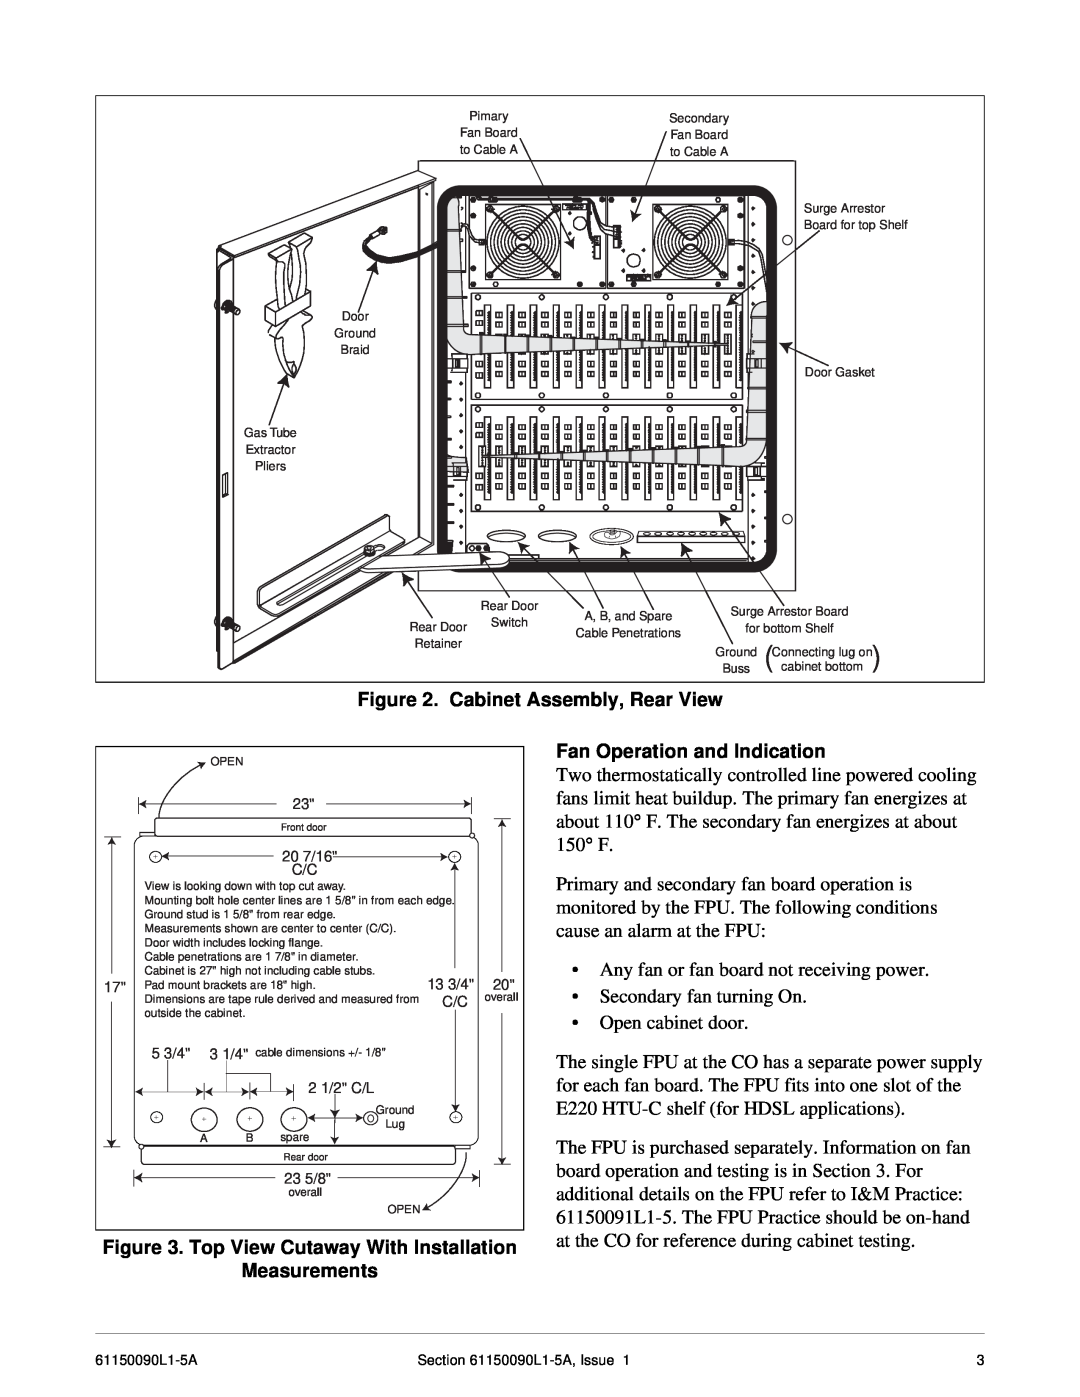 ADTRAN T200 H2TU-R dimensions Cabinet Assembly, Rear View, Top View Cutaway With Installation Measurements 